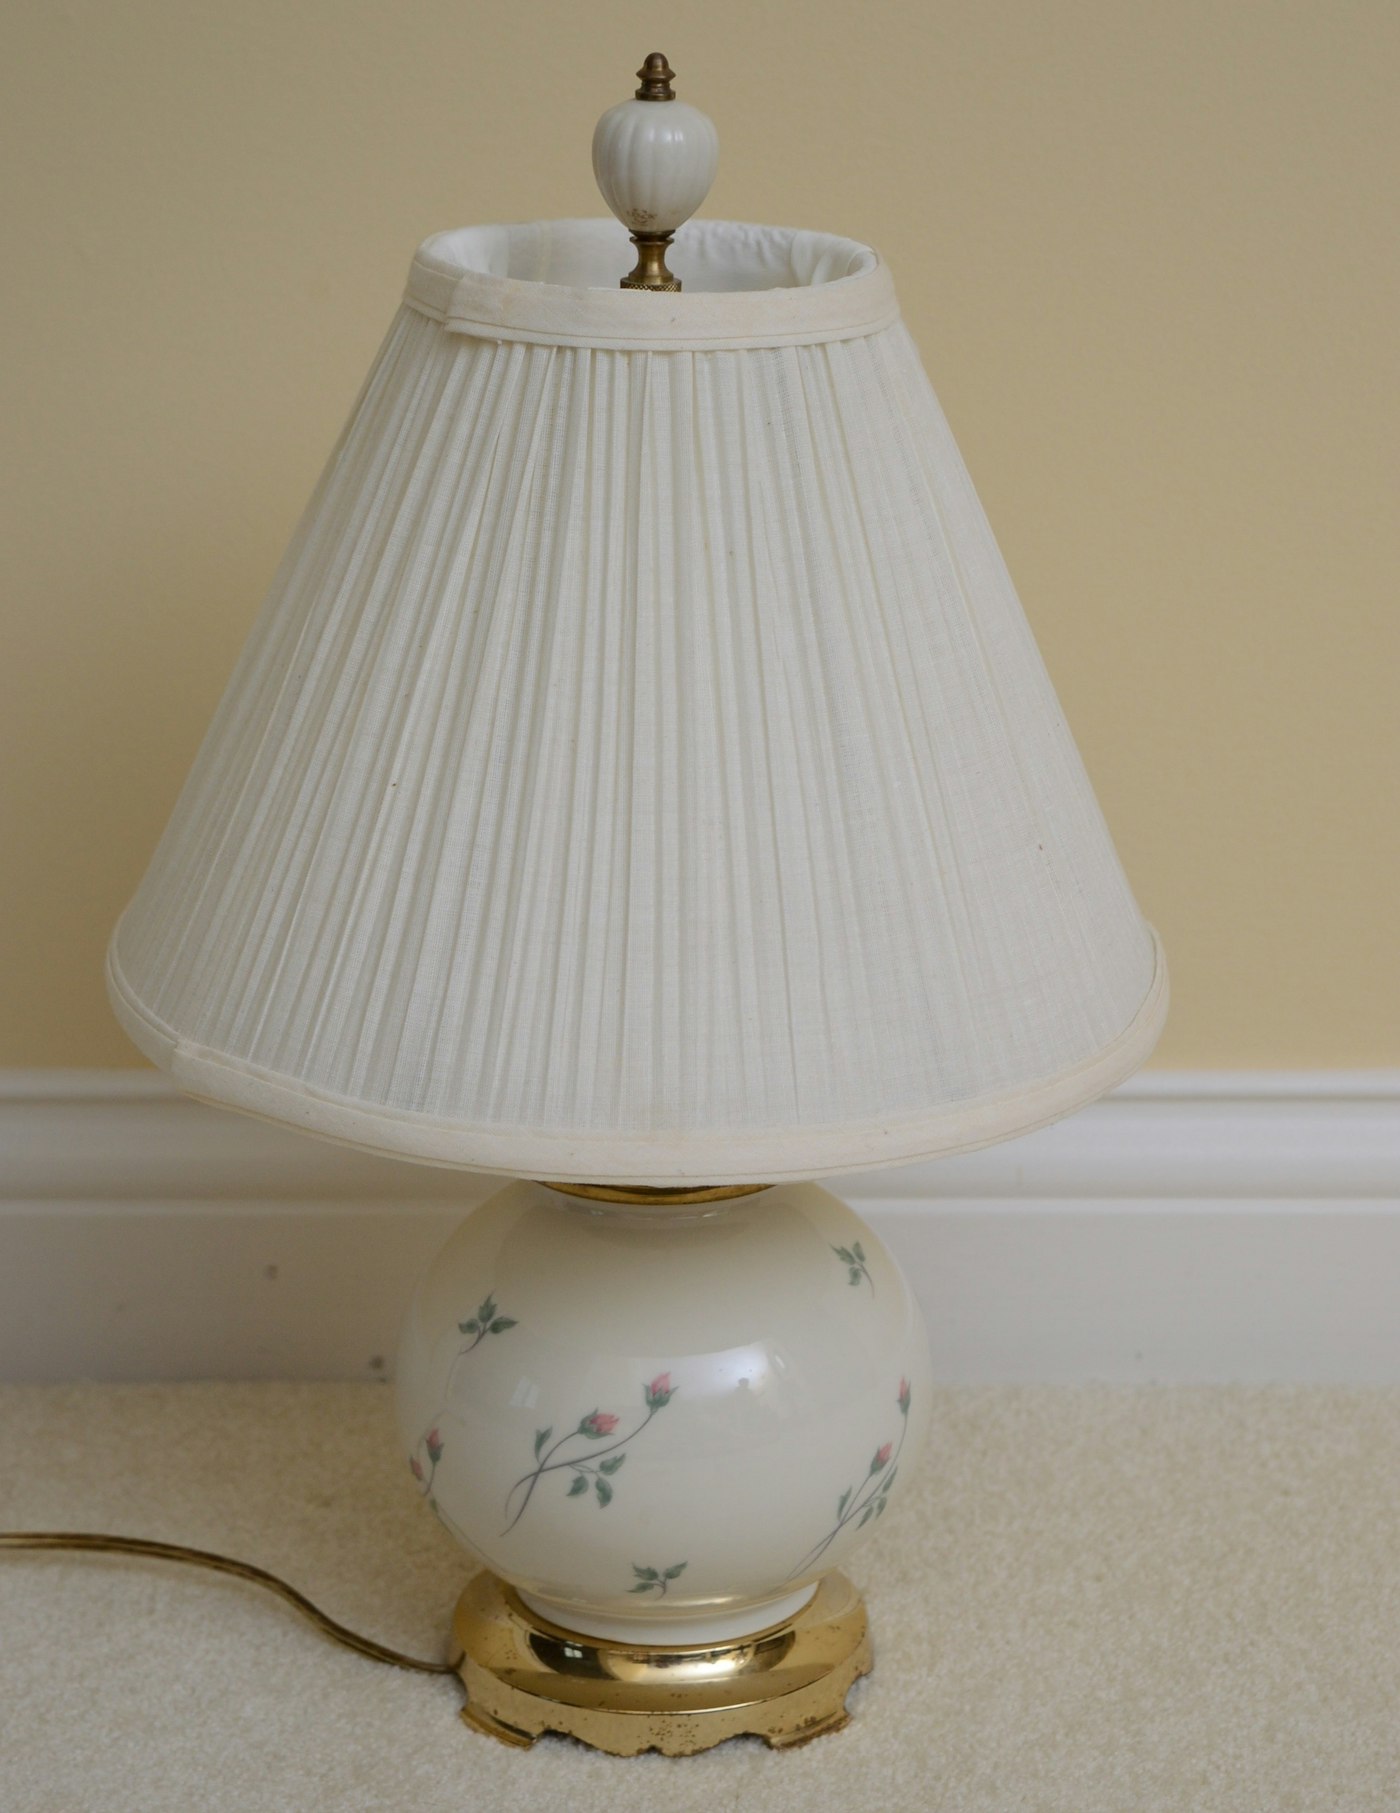 Wedgwood and Lenox Table Lamps with Vintage Porcelain Lamp | EBTH